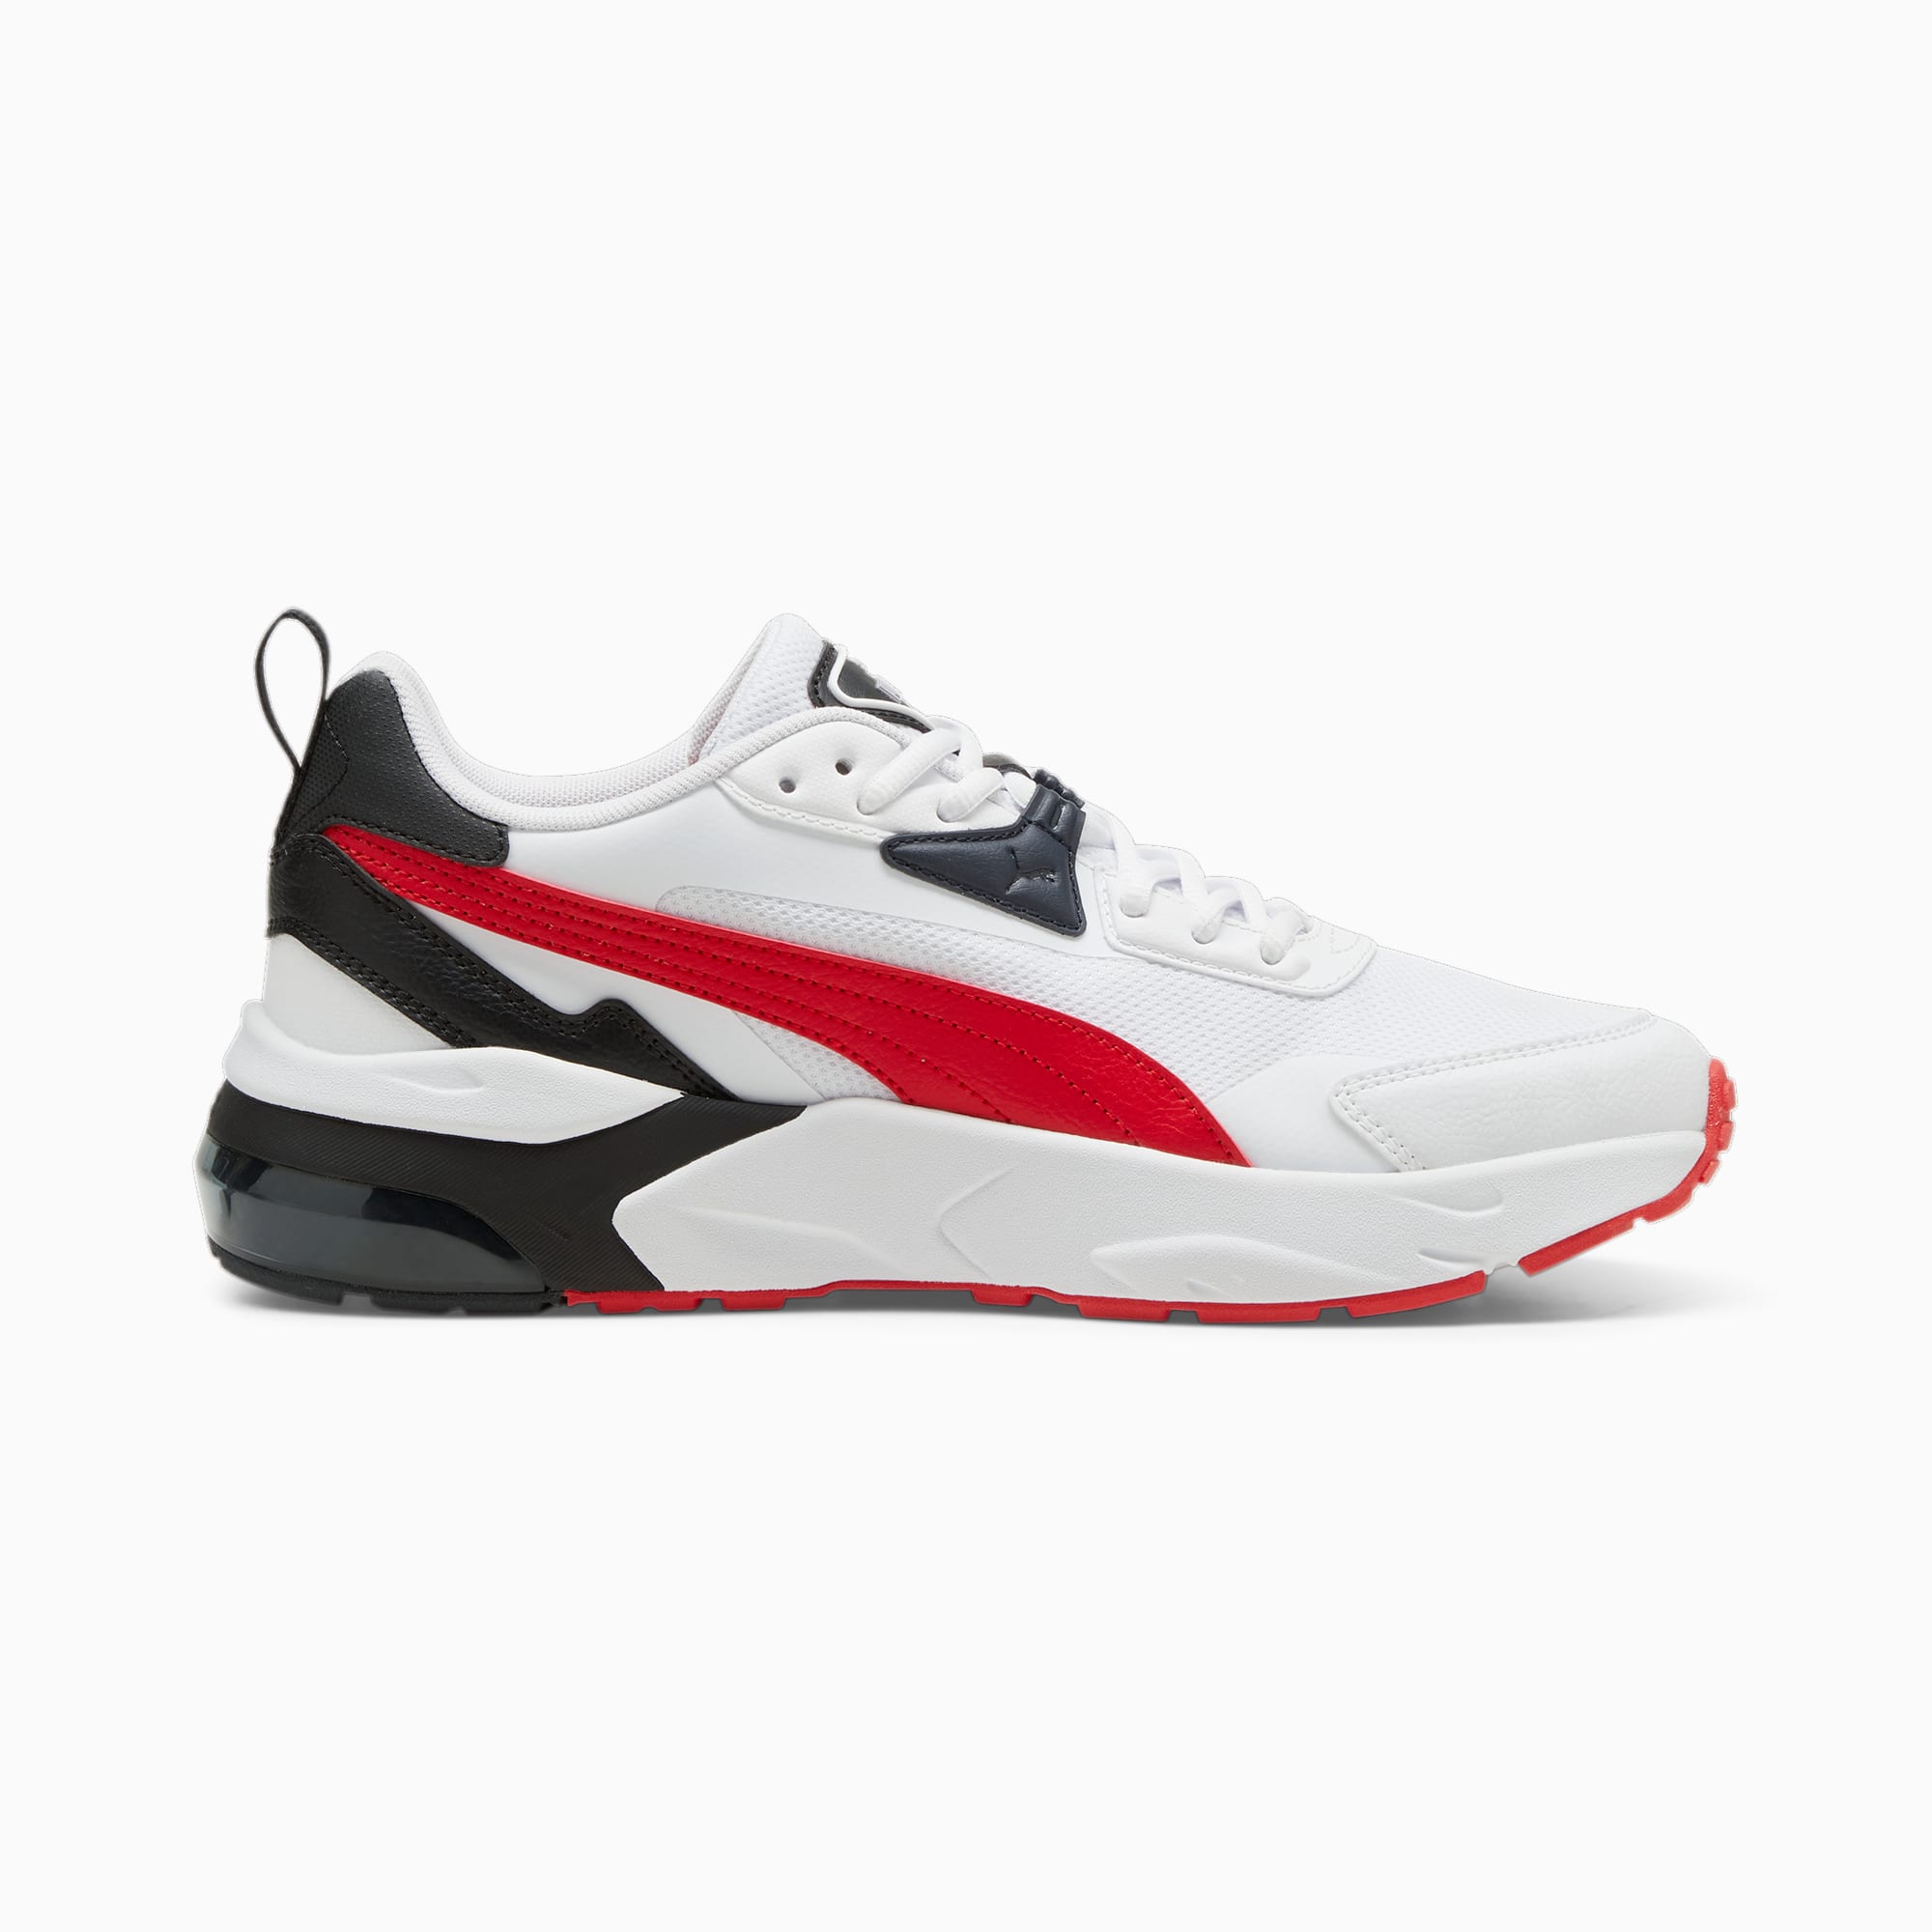 Women's PUMA Vis2K Sneakers, White/For All Time Red/Black, Size 35,5, Shoes